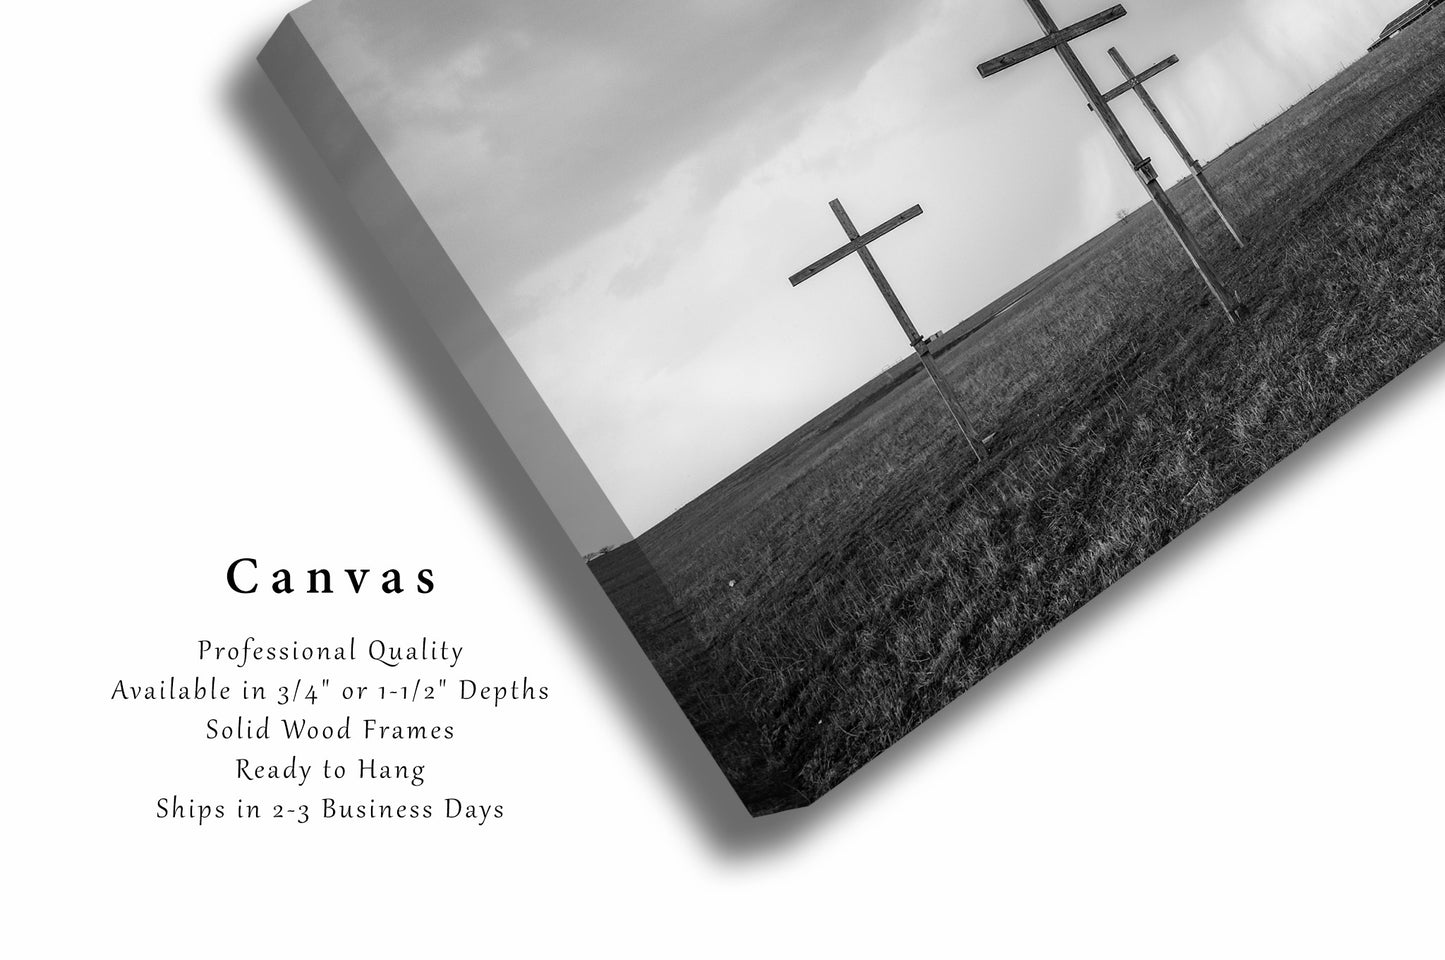 Canvas Wall Art | Three Wooden Crosses Photo | Christianity Gallery Wrap | Texas Photography | Black and White Picture | Religious Decor